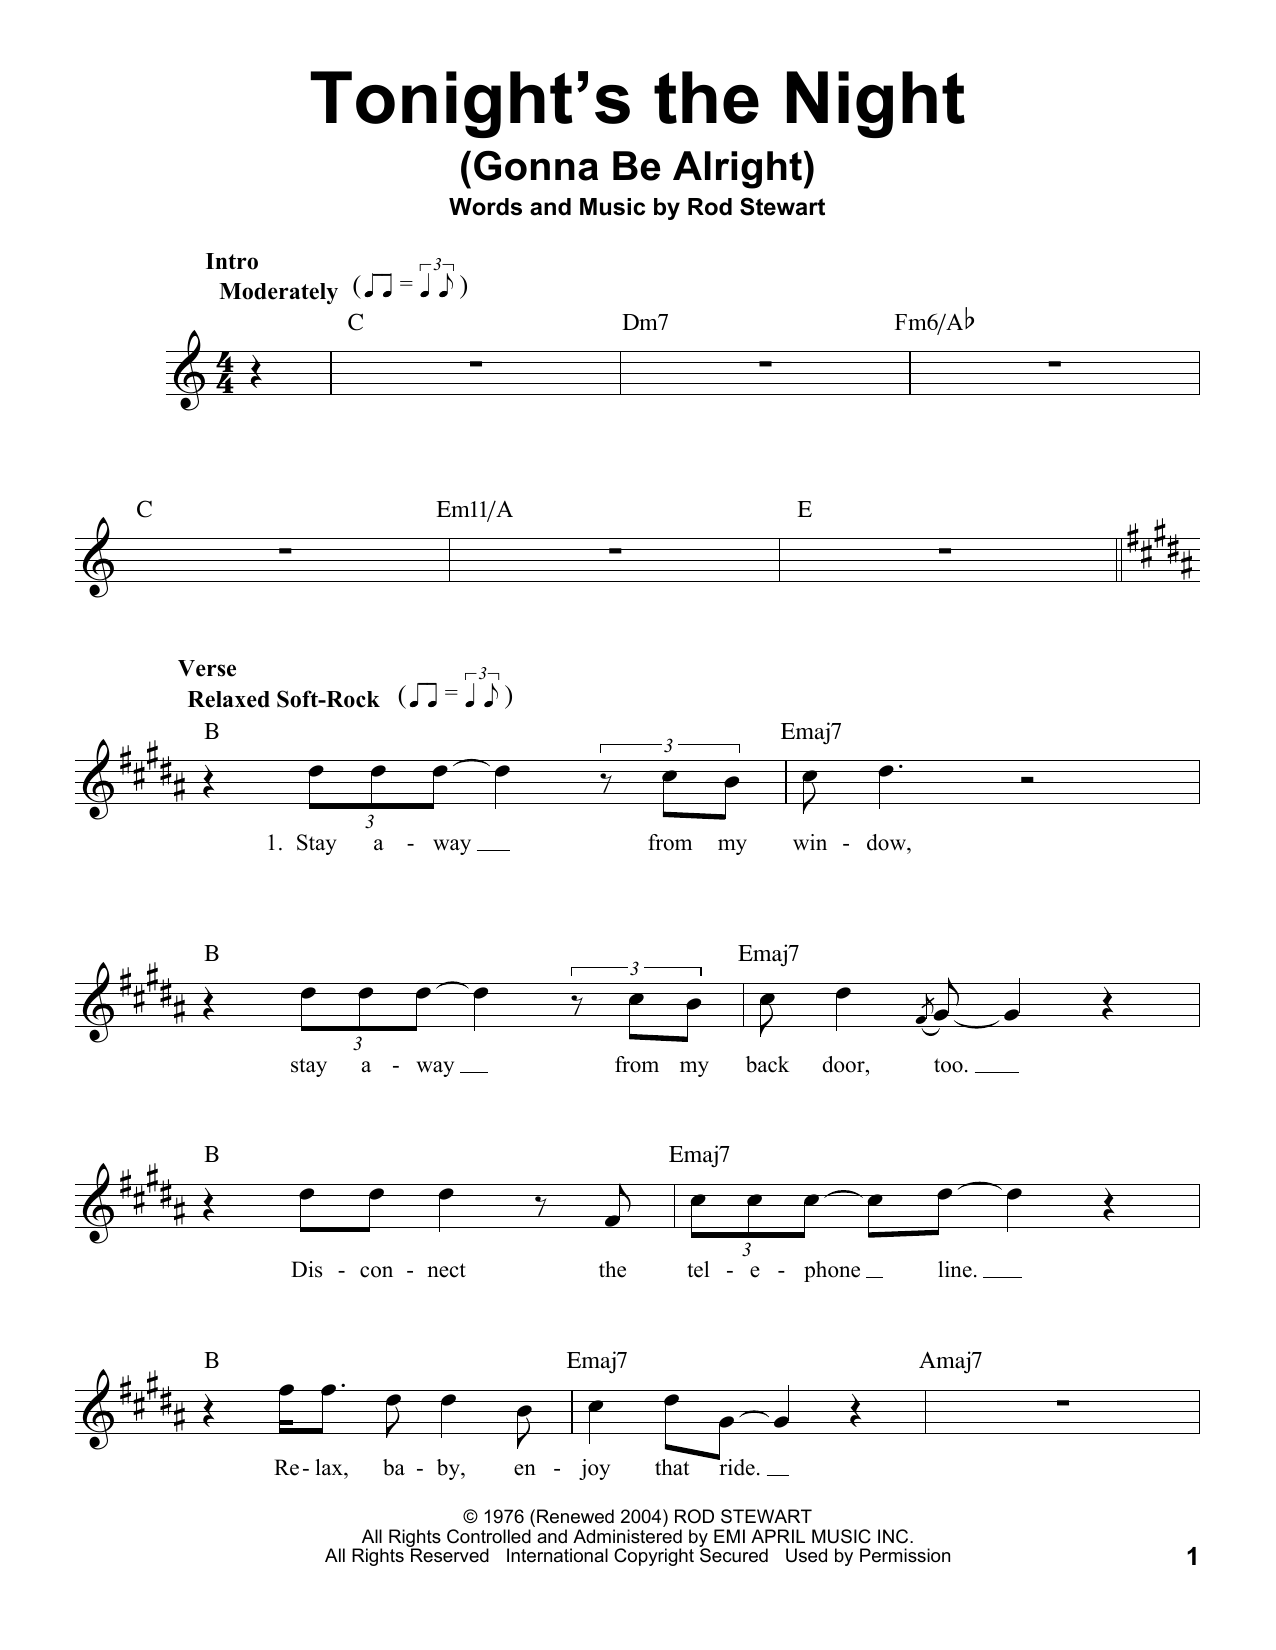 Download Rod Stewart Tonight's The Night (Gonna Be Alright) Sheet Music